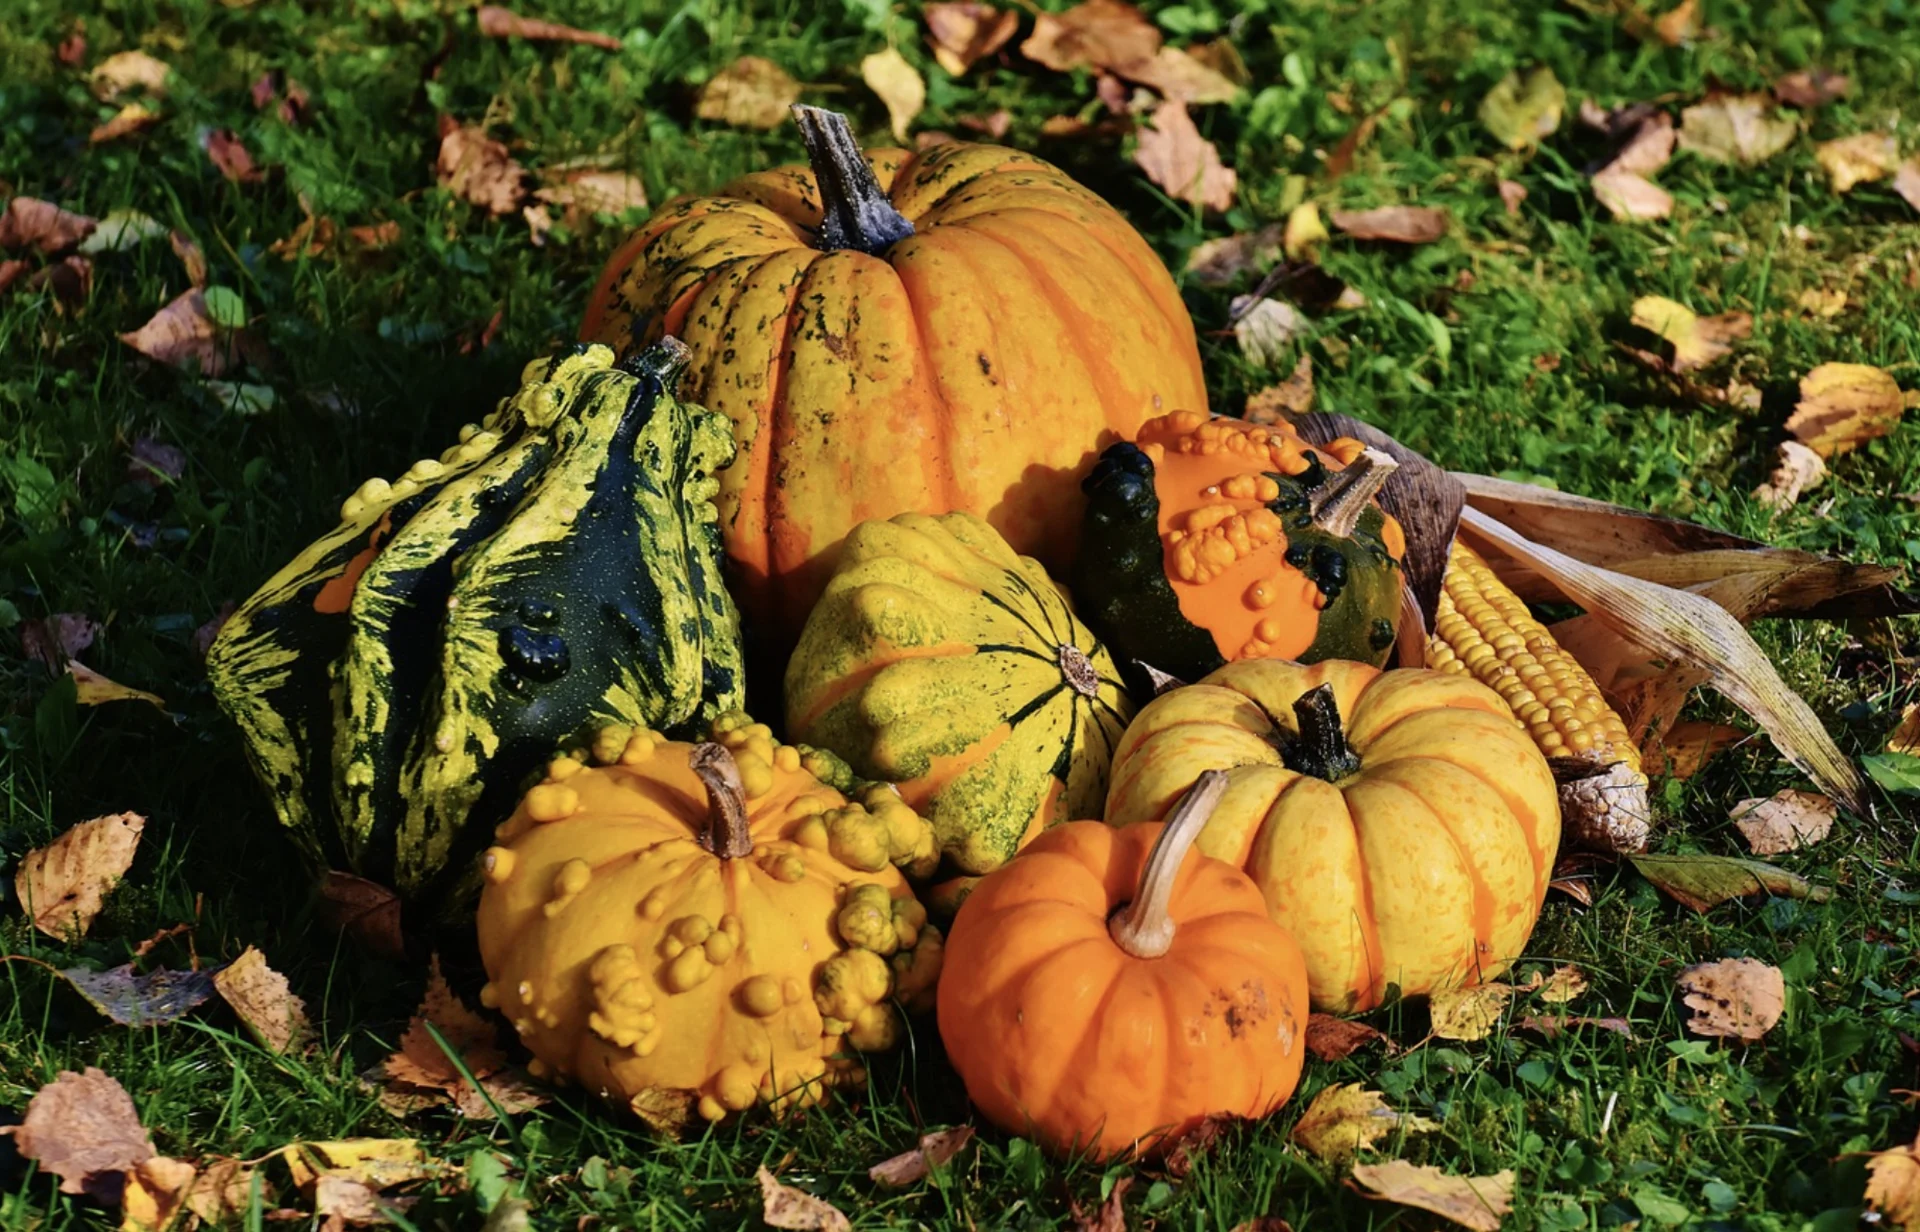 There's a lot you don't know about pumpkins